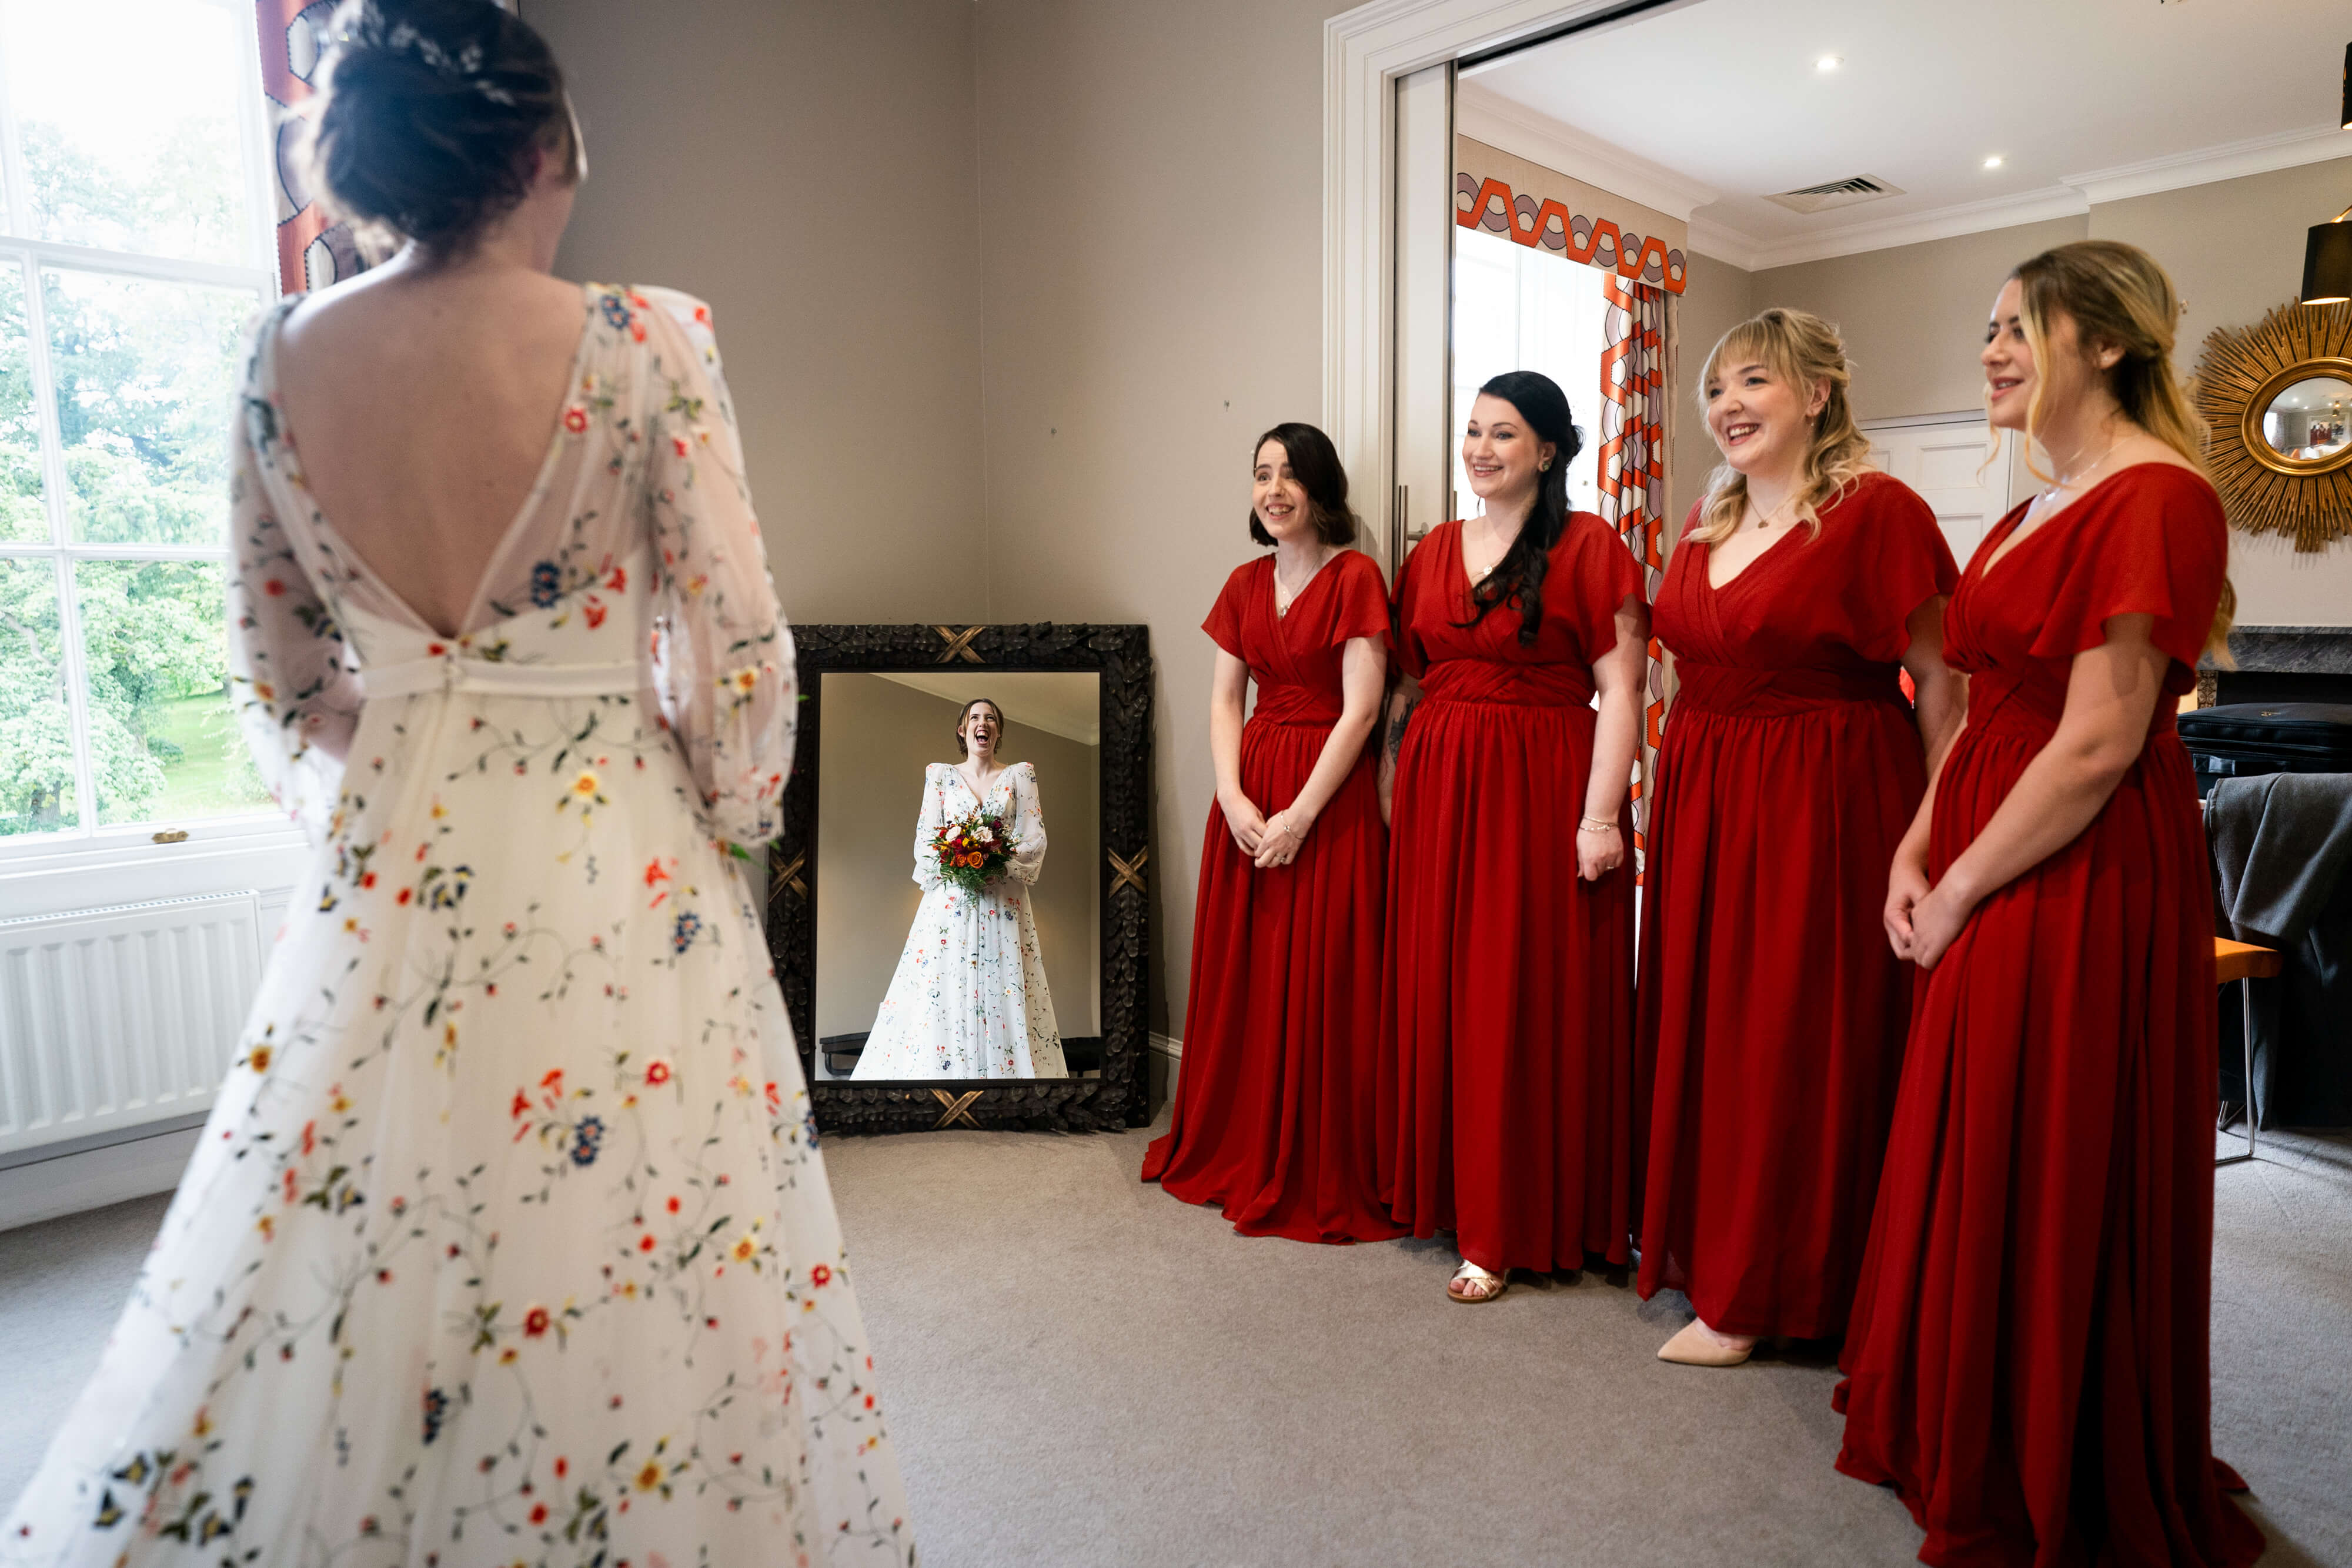 Bride reflection in mirror with smiling bridesmaids in red dresses.